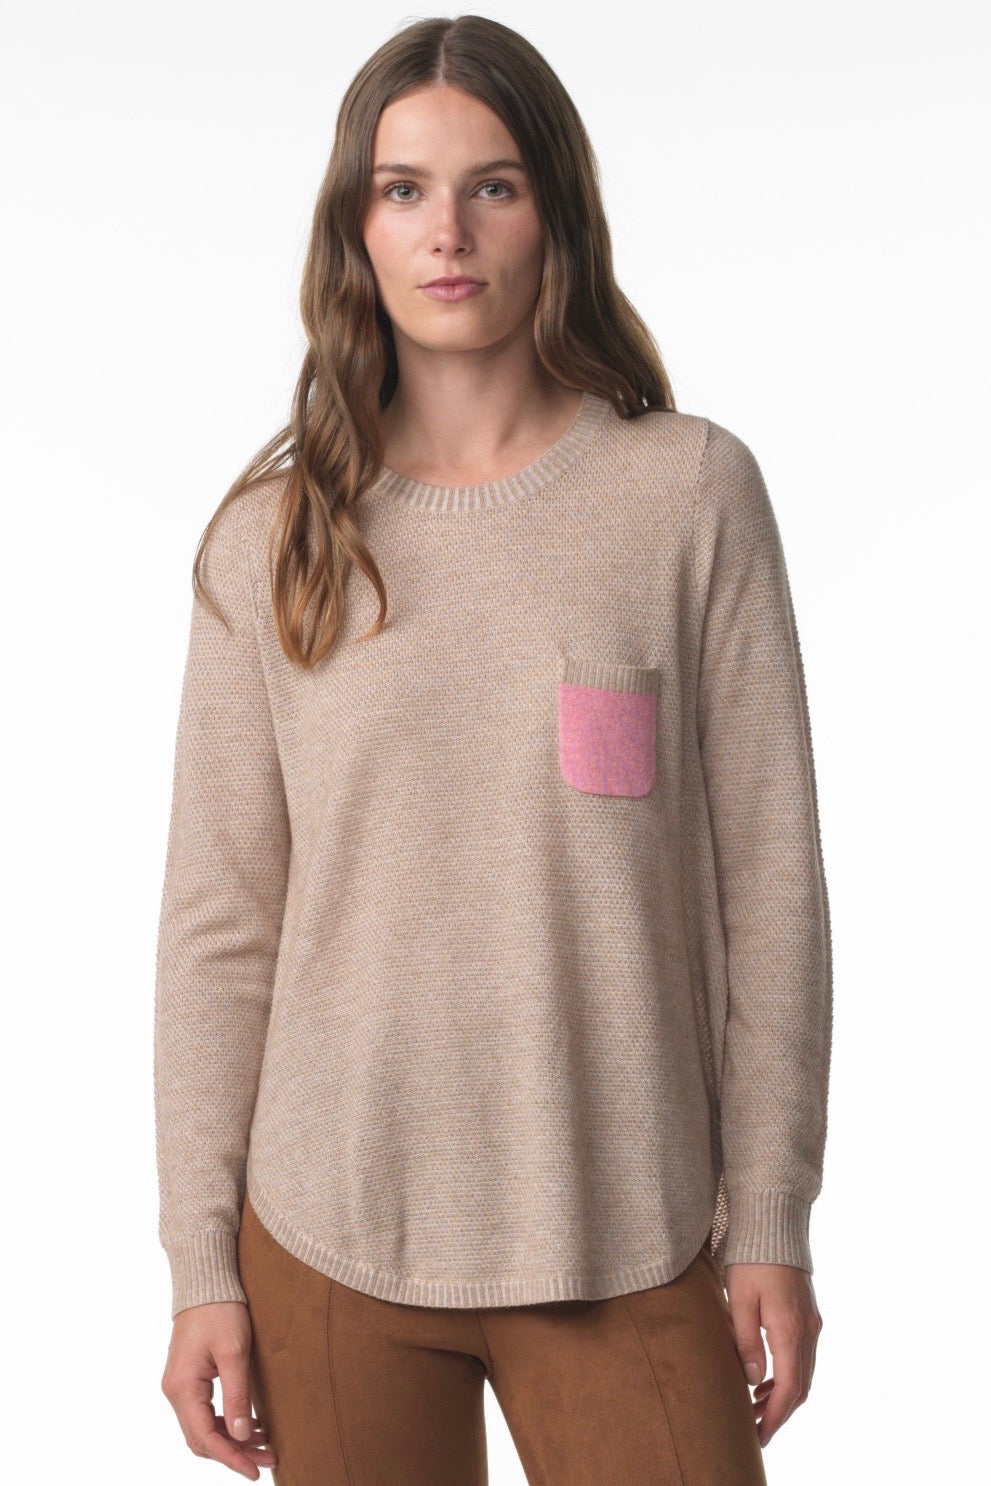 POCKET SWEATER - CAPPUCCINO - Kingfisher Road - Online Boutique